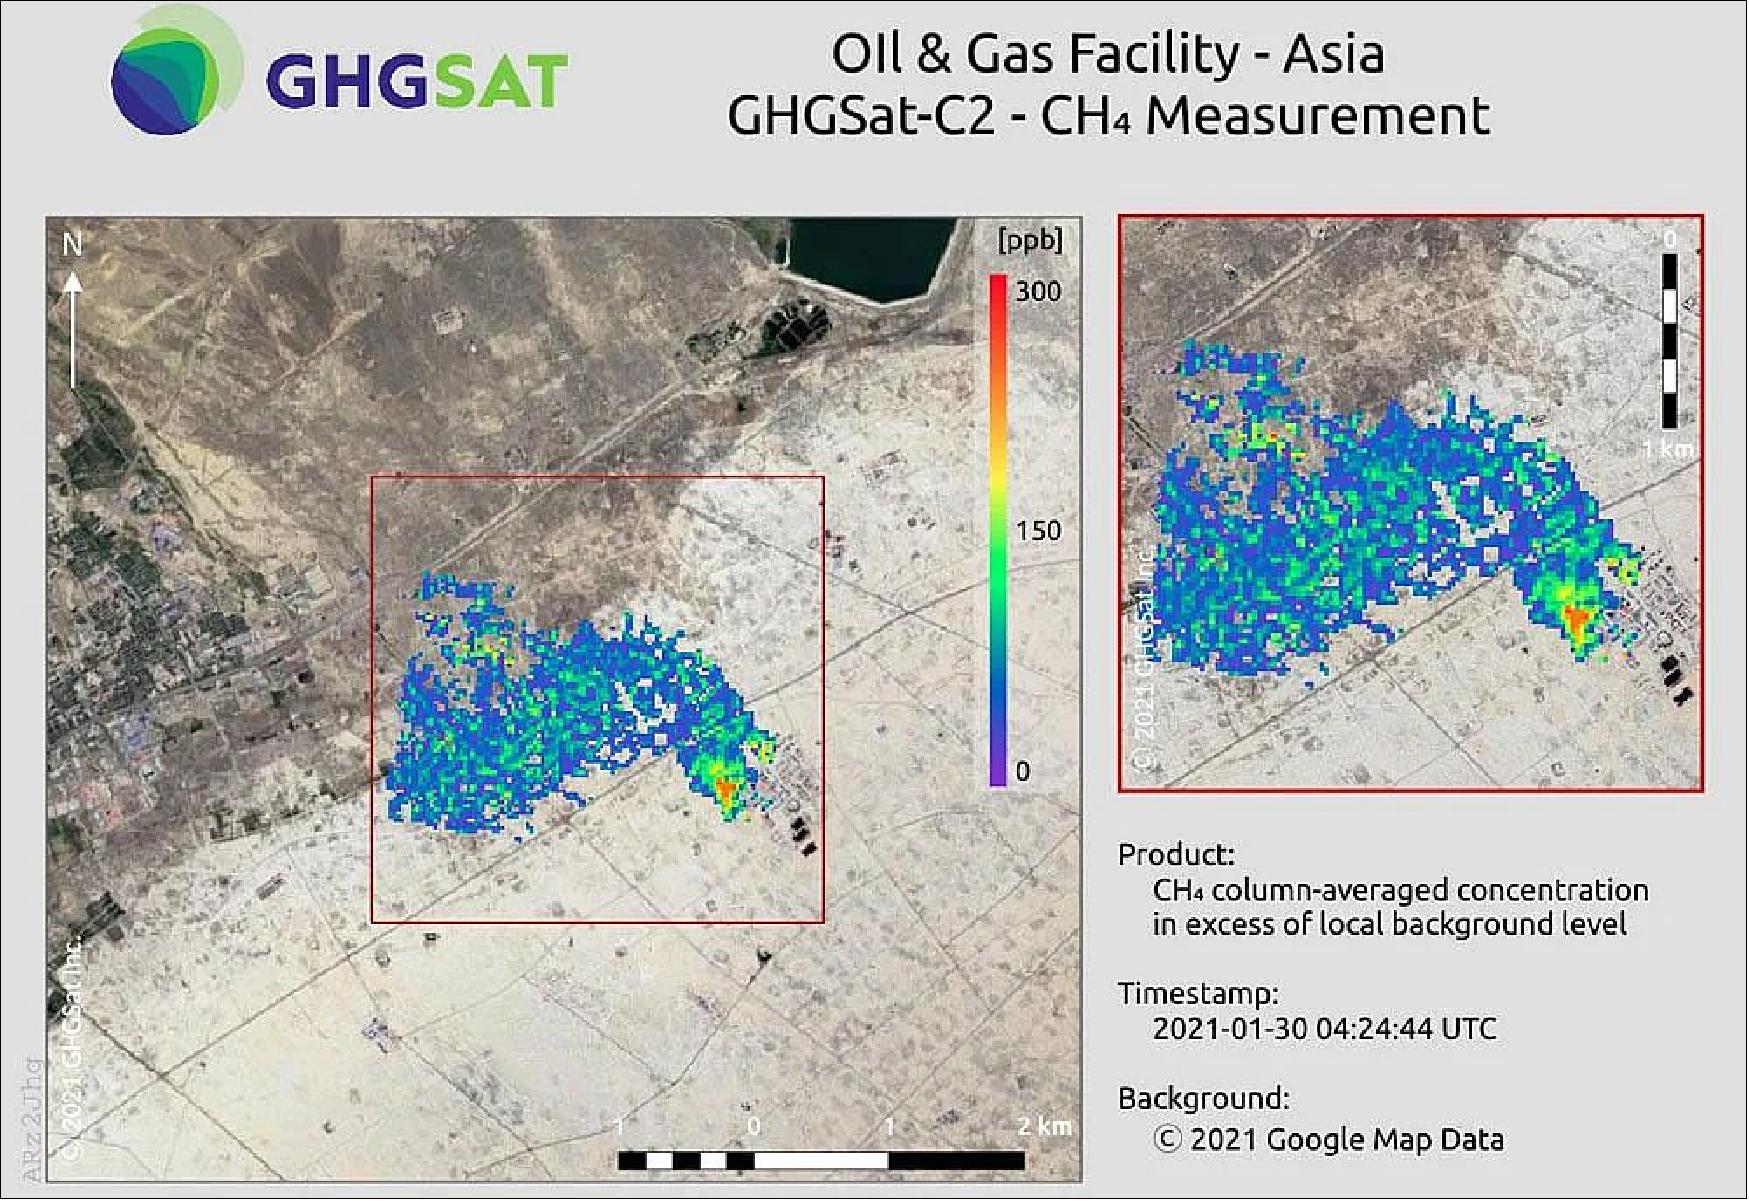 Figure 13: The new satellite detected a methane plume from an oil and gas facility while overflying Asia (image credit: GHGSat)